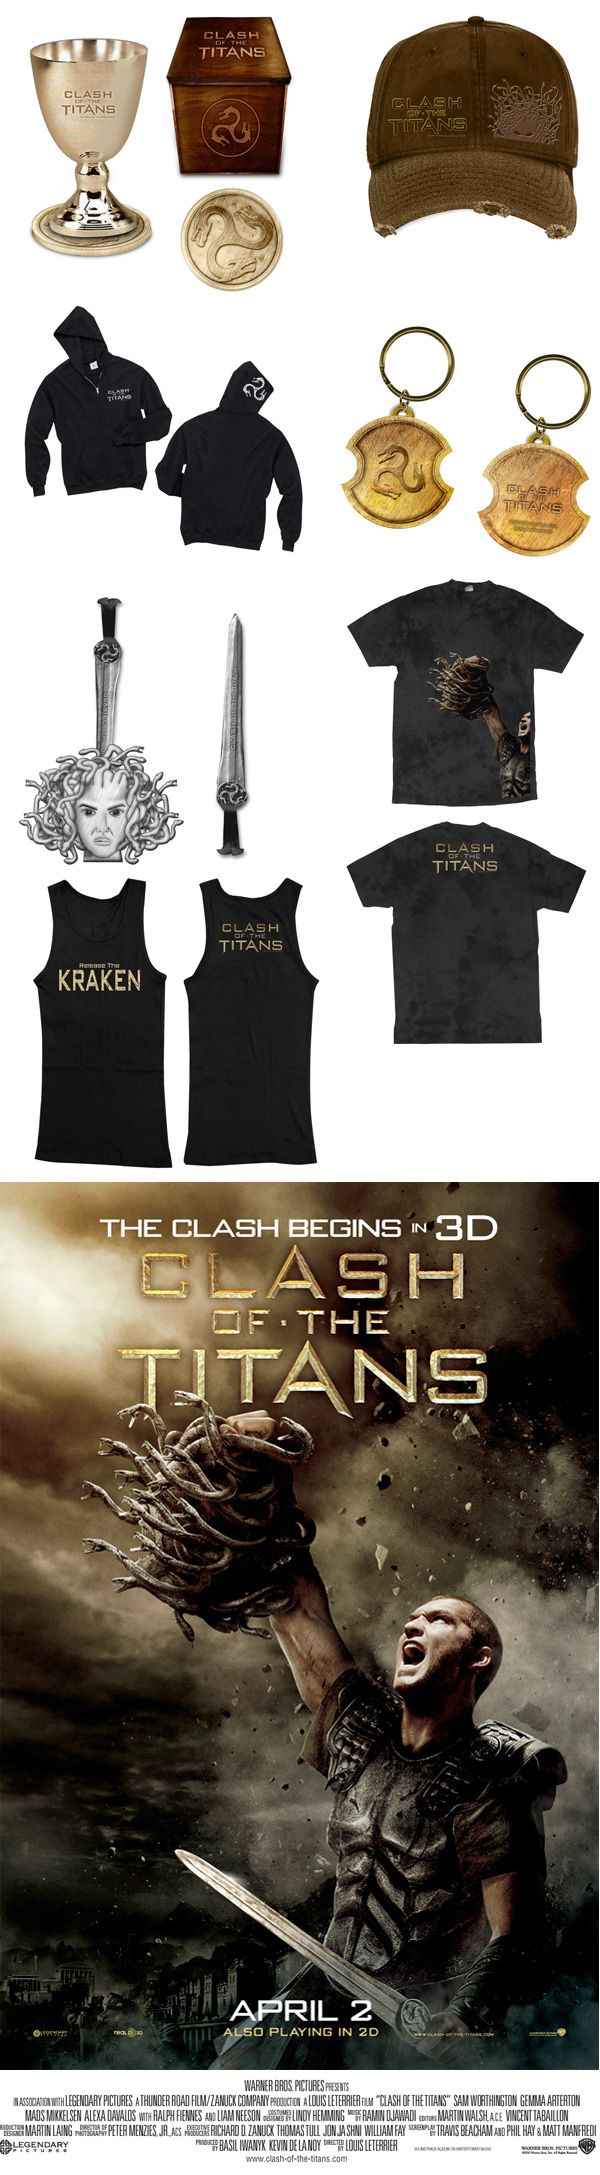 Clash of the Titans giveaway.jpg